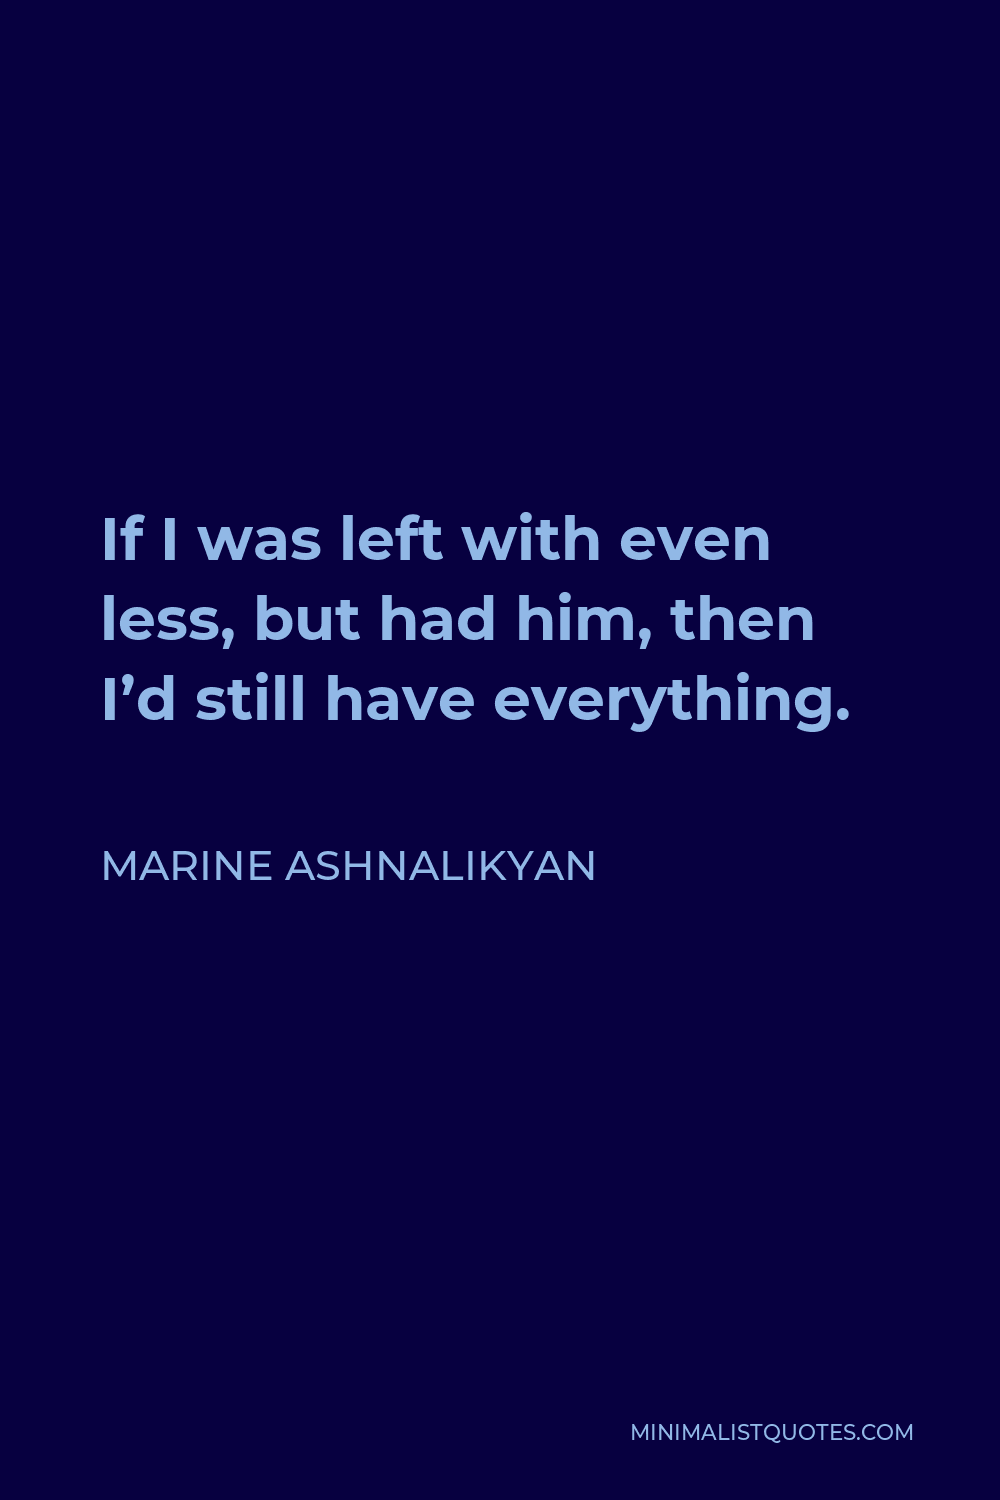 Marine Ashnalikyan Quote - If I was left with even less, but had him, then I’d still have everything.